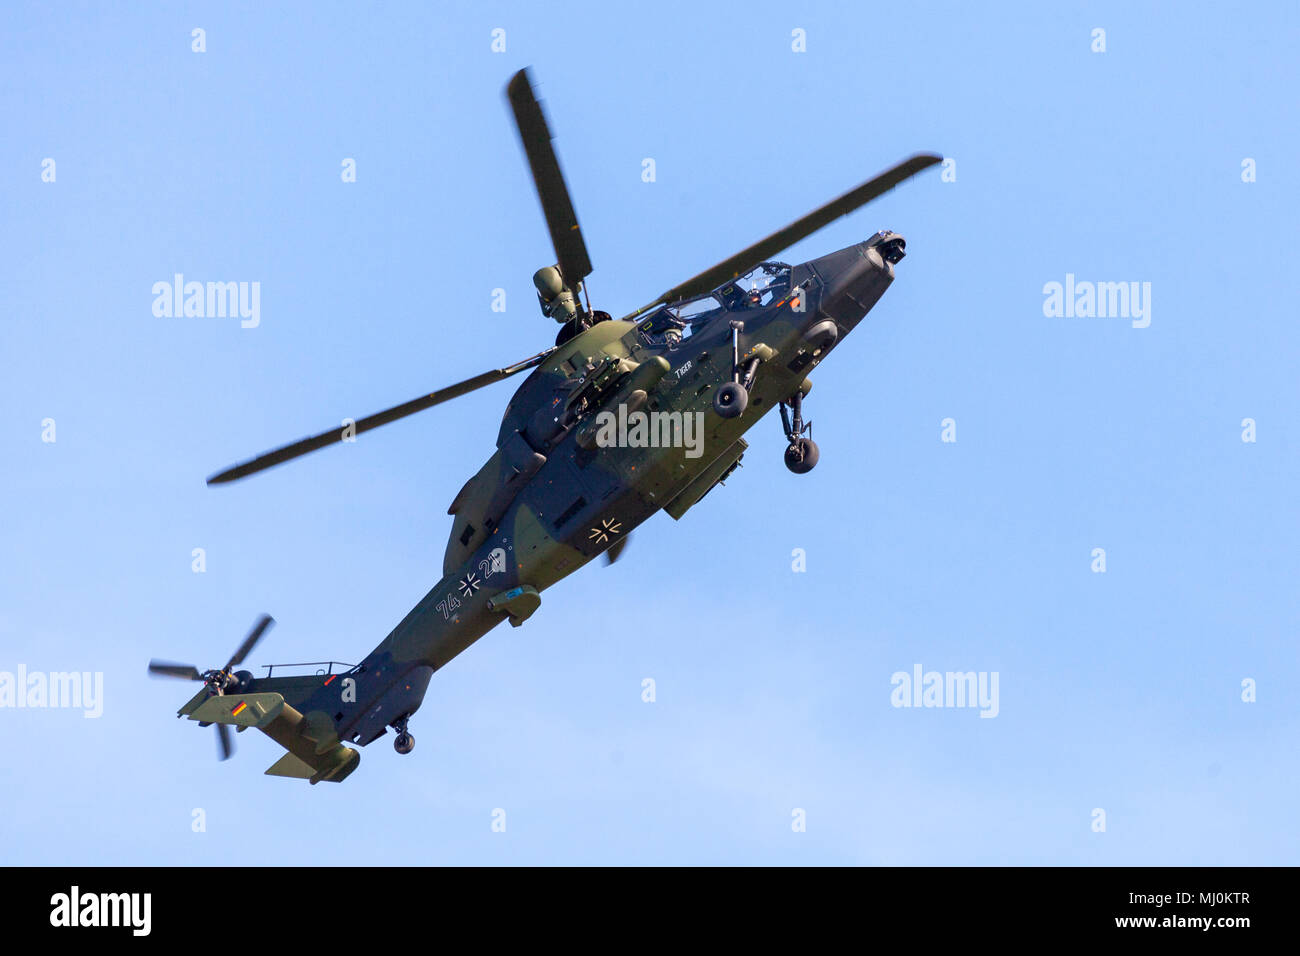 BERLIN / GERMANY - APRIL 28, 2018: Military twin-engined attack helicopter Tiger, from Airbus Helicopters flies at airport Berlin / Schoenefeld. Stock Photo